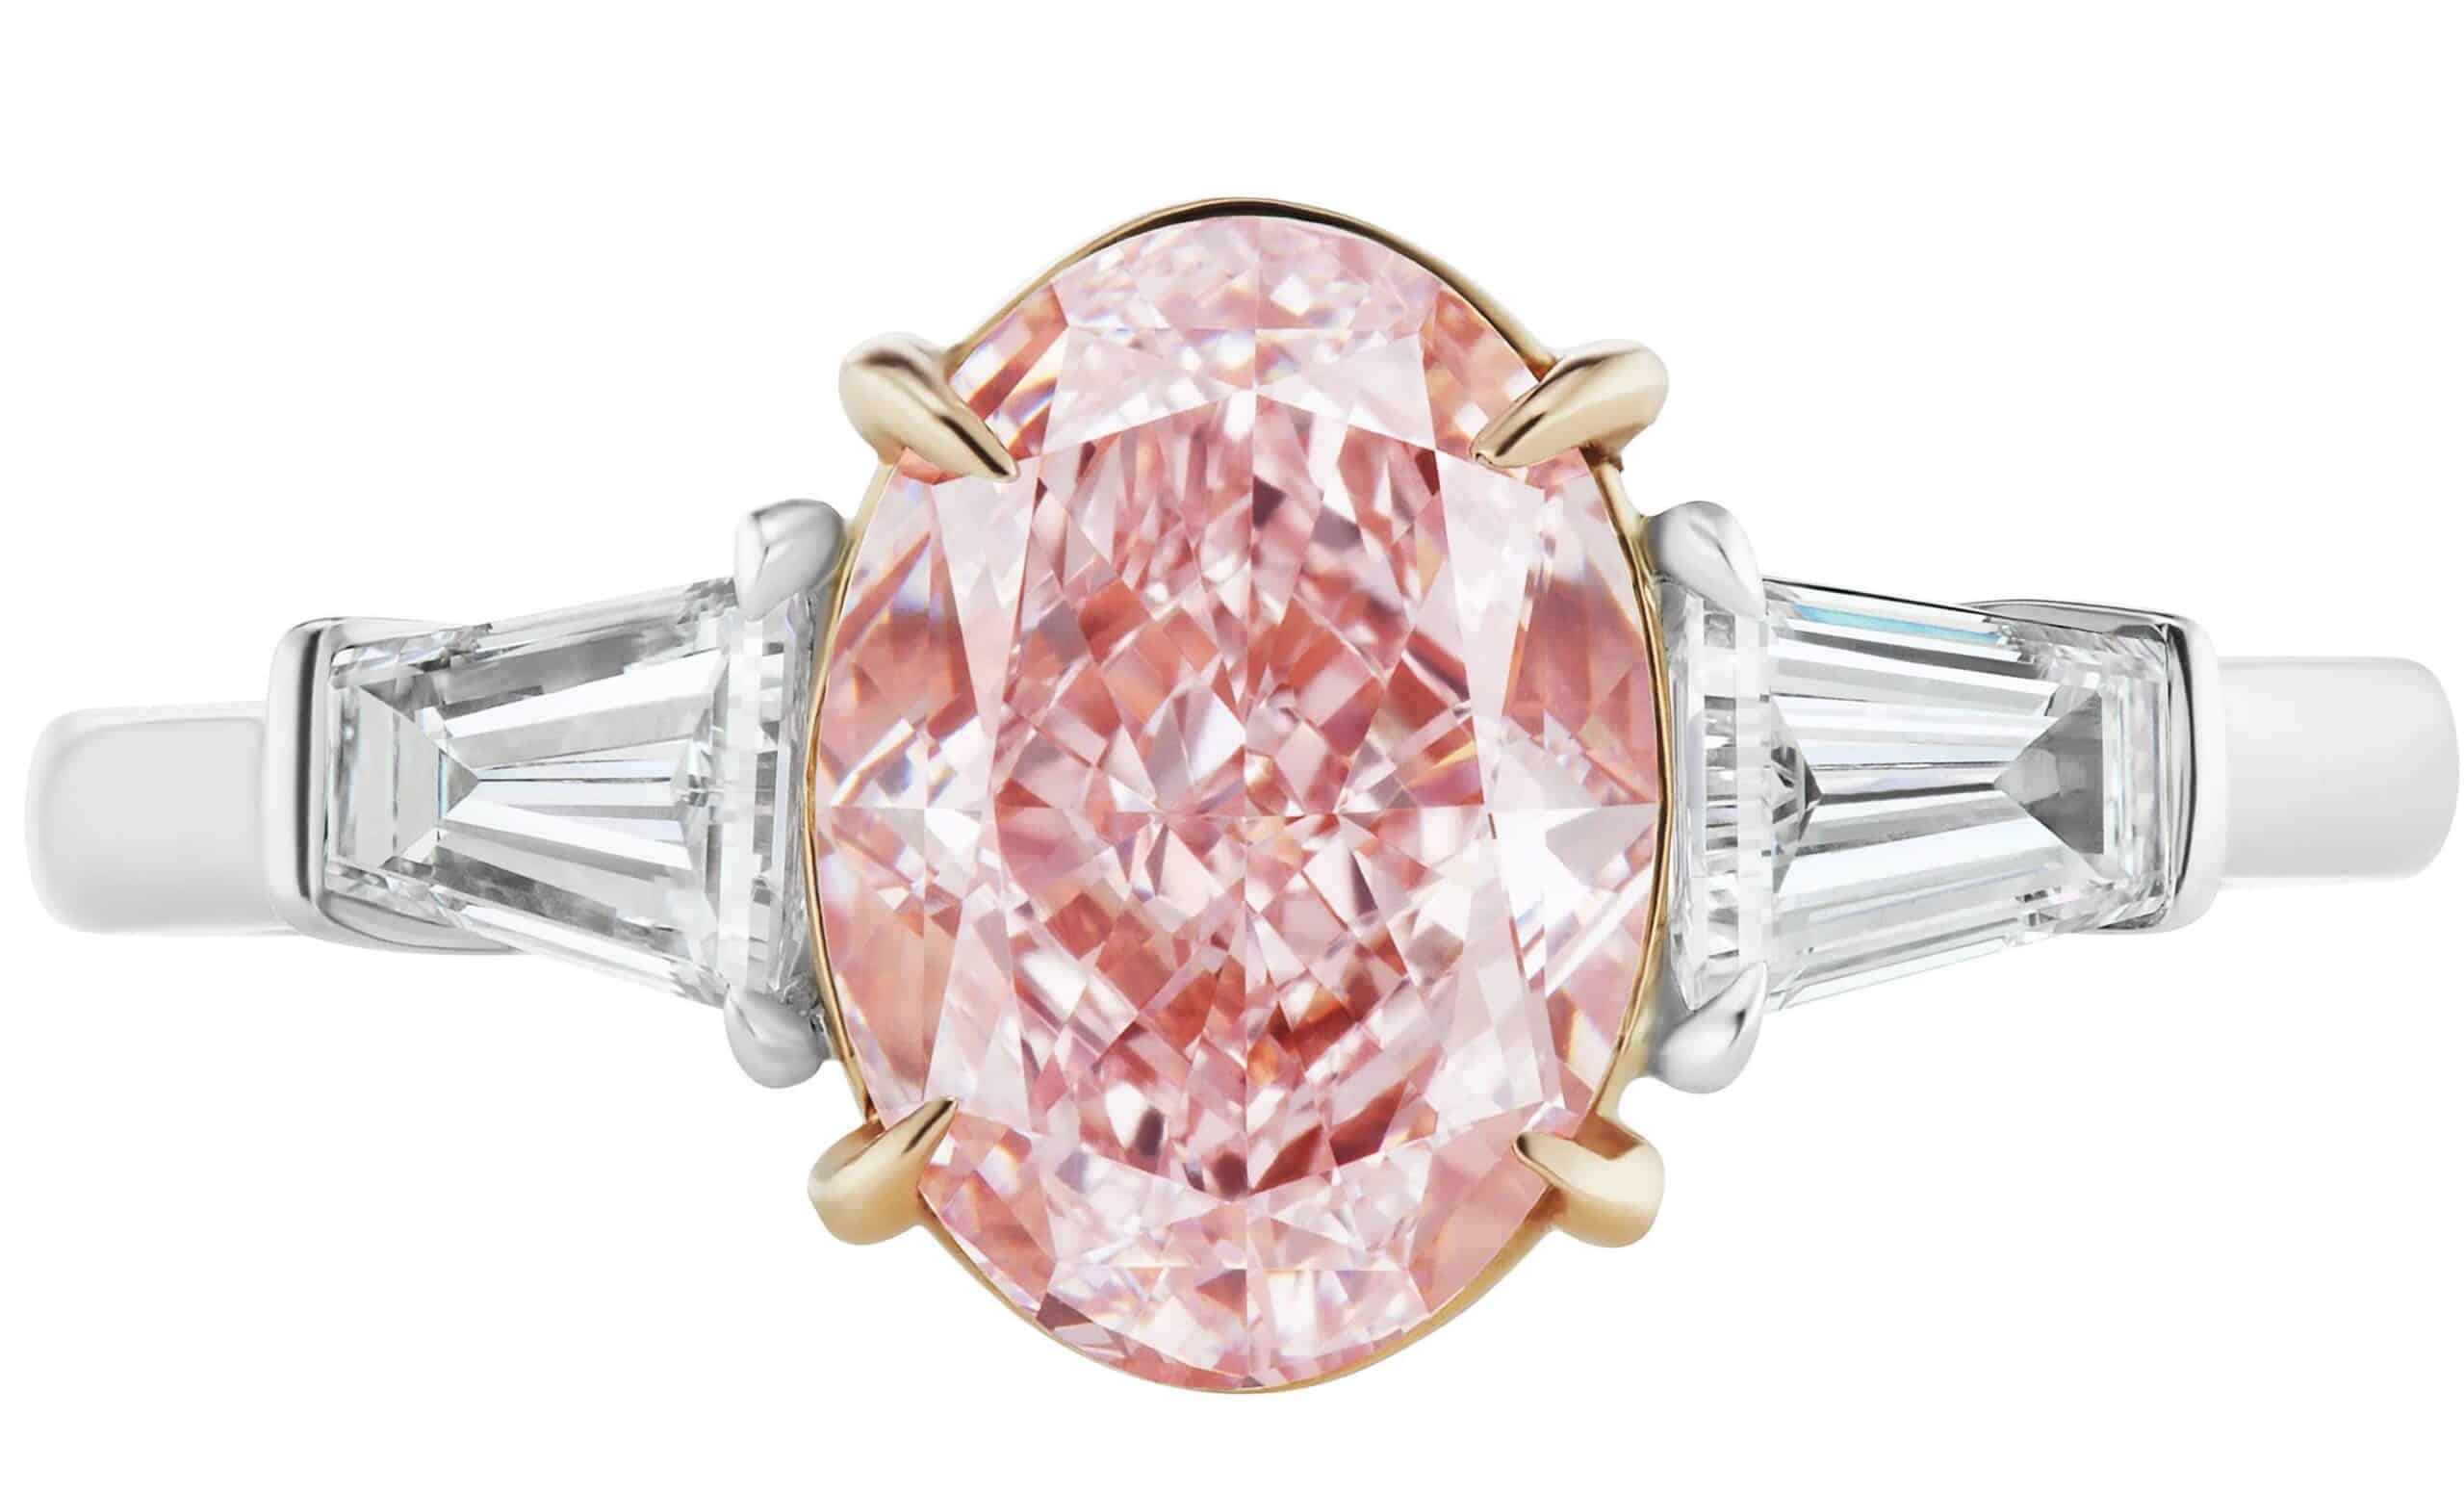 Pink Diamonds Are Mysterious — and Incredibly Valuable